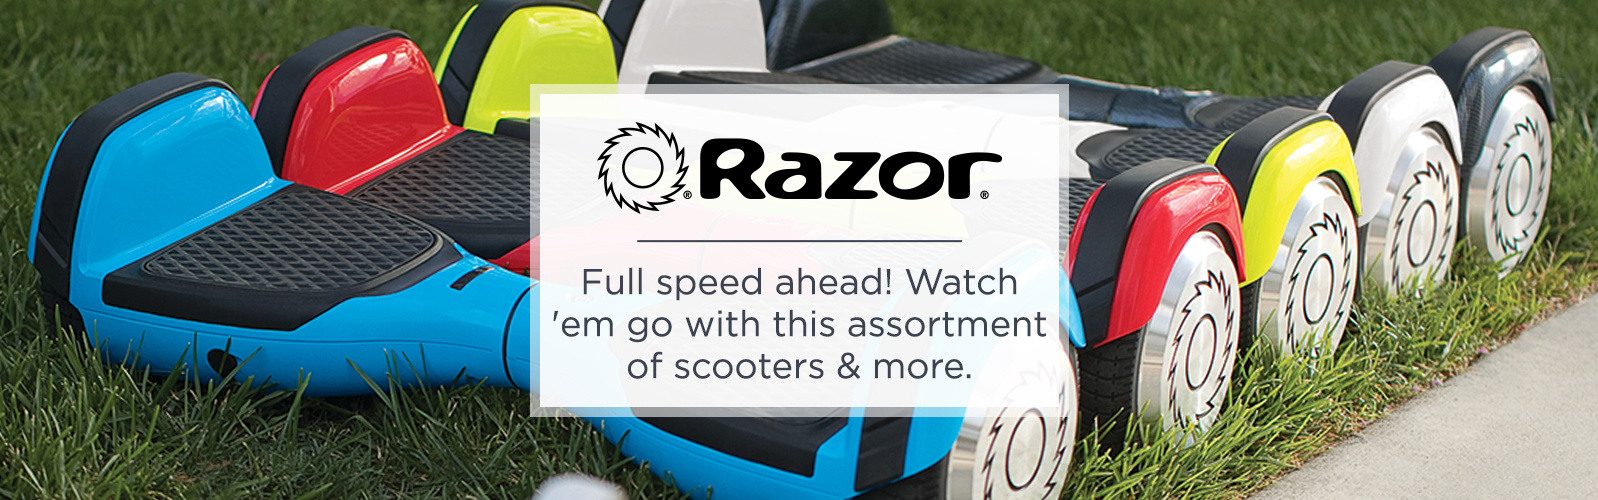 Razor. Full speed ahead! Watch 'em go with this assortment of scooters & more.